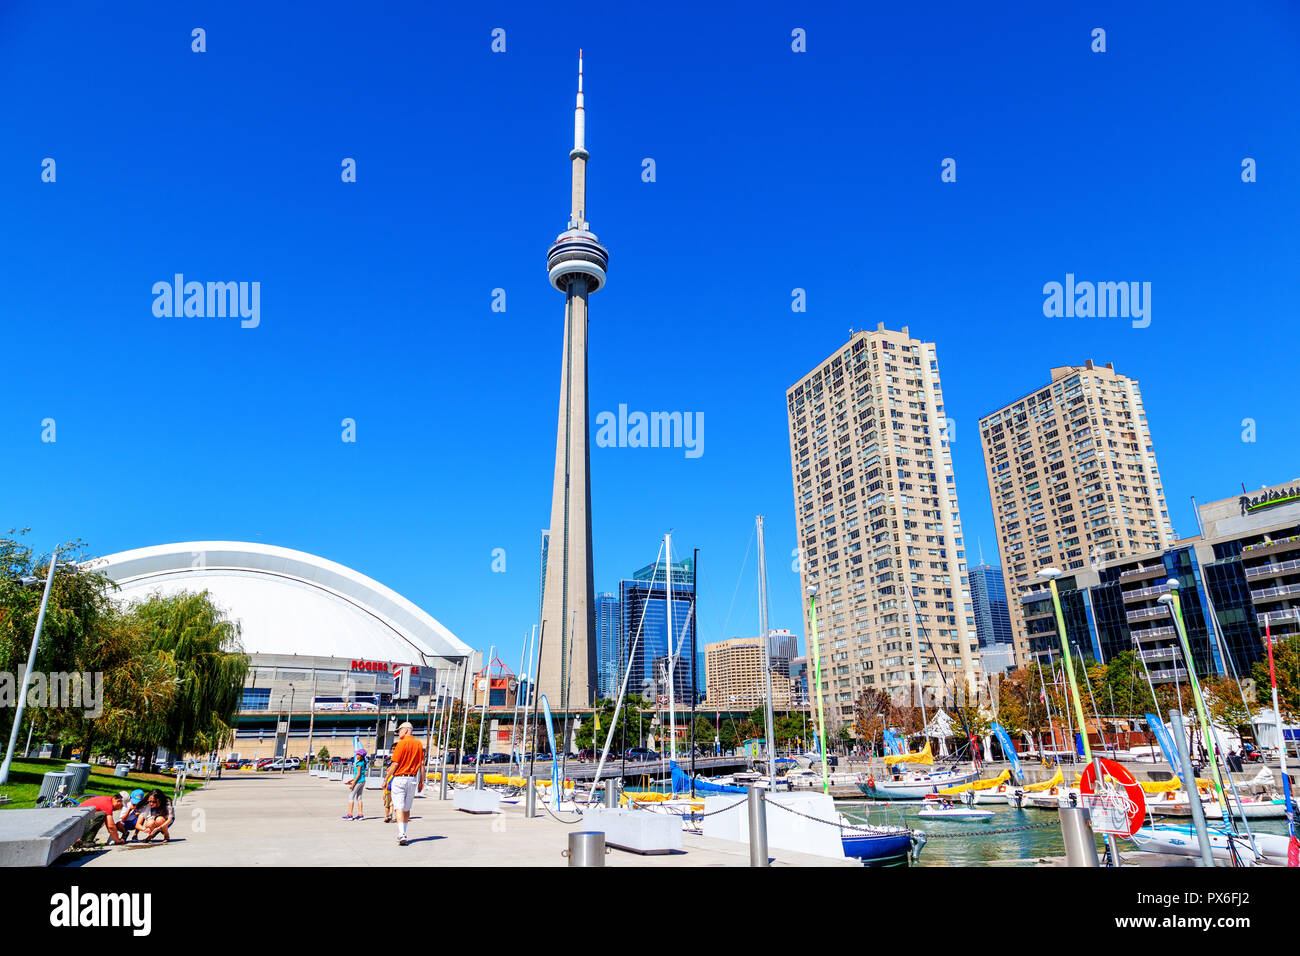 TORONTO, CANADA - AUG 29, 2012: Downtown marina in Toronto with landmark CN Tower, Rogers Centre and city skyline. Stock Photo